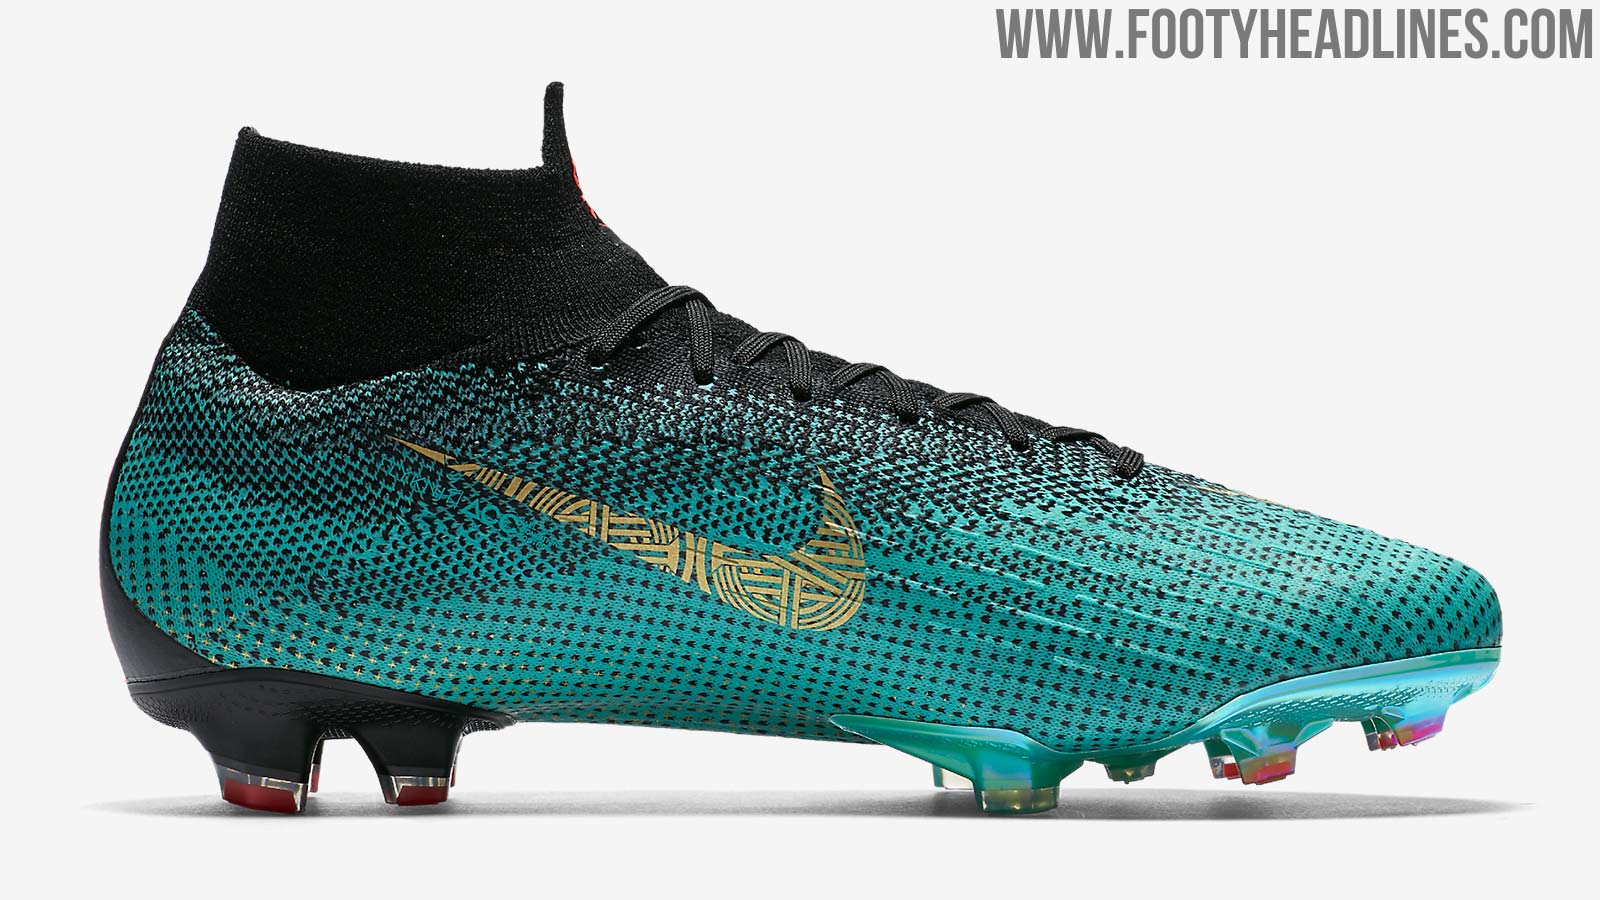 Nike Mercurial Superfly 360 Cristiano Ronaldo 6 Born Boots Released - Footy